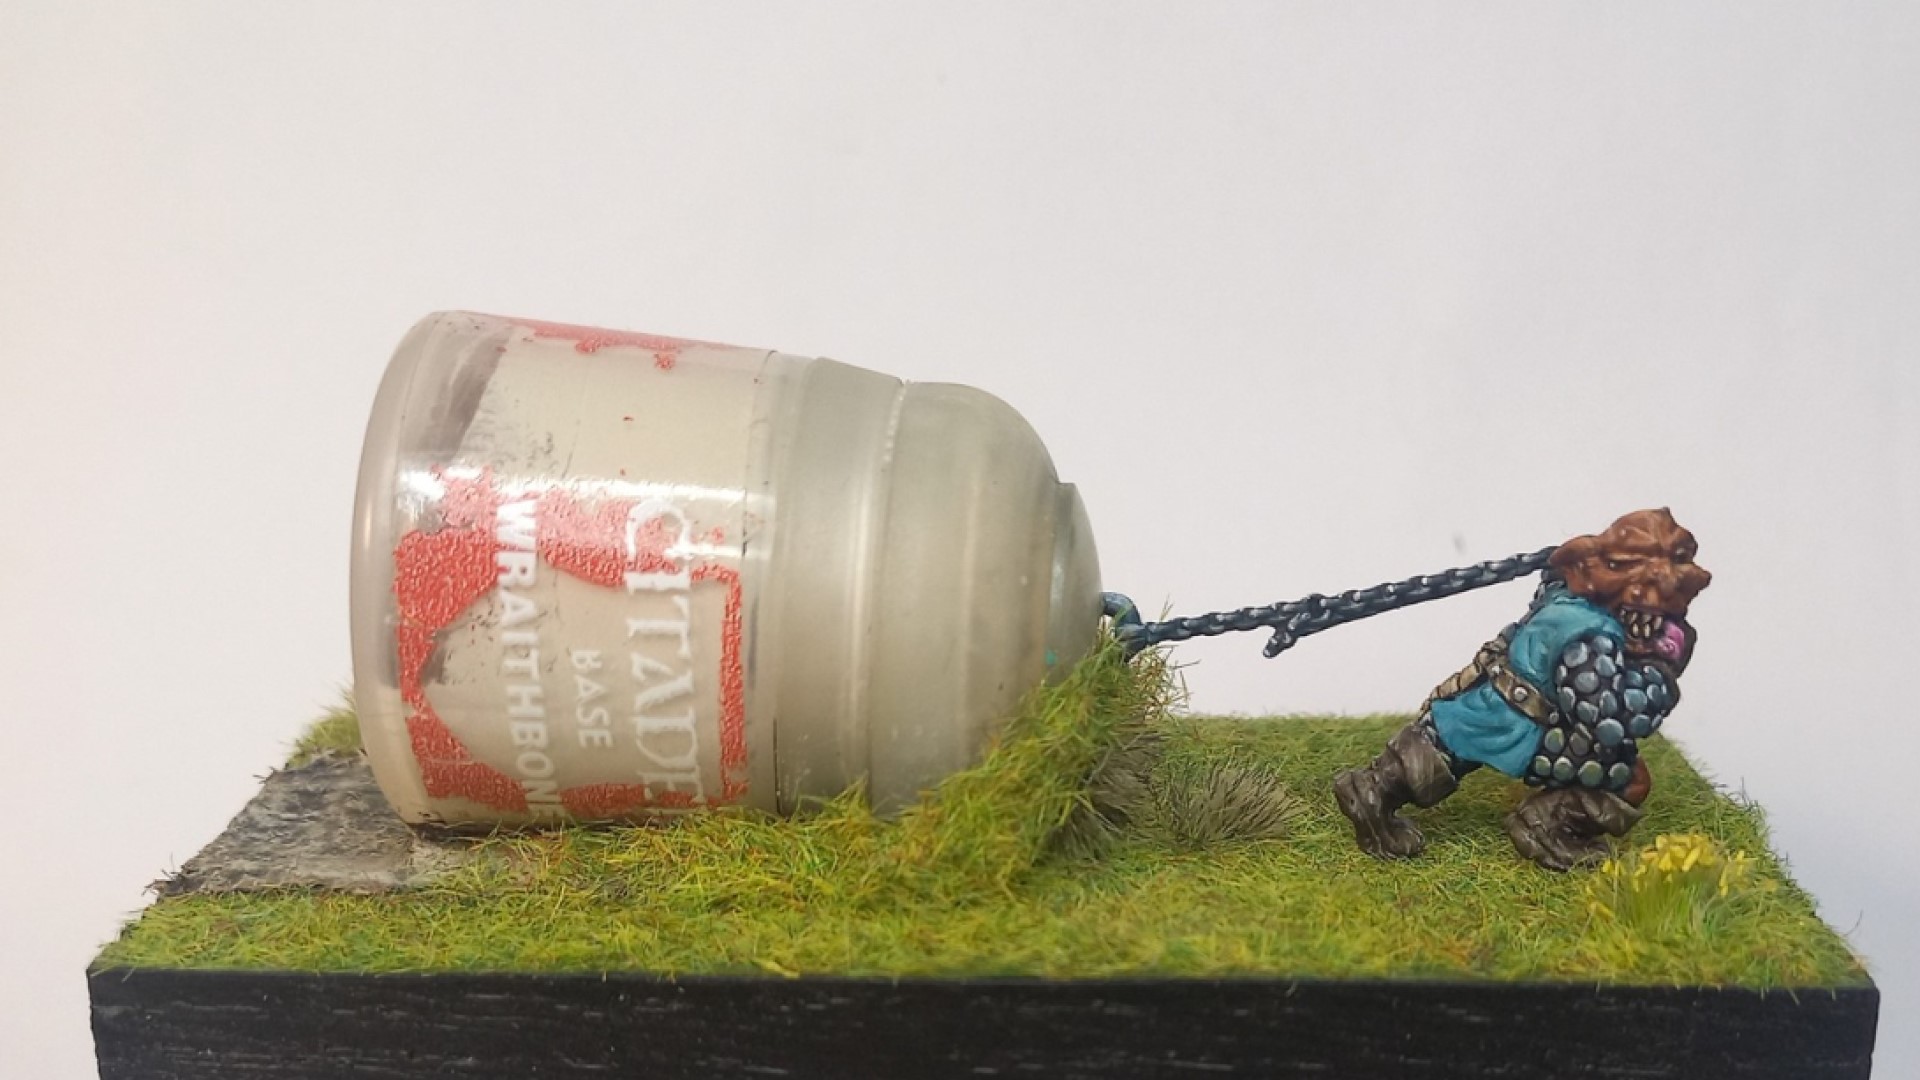 How do you deal with citadel paint pots? : r/minipainting